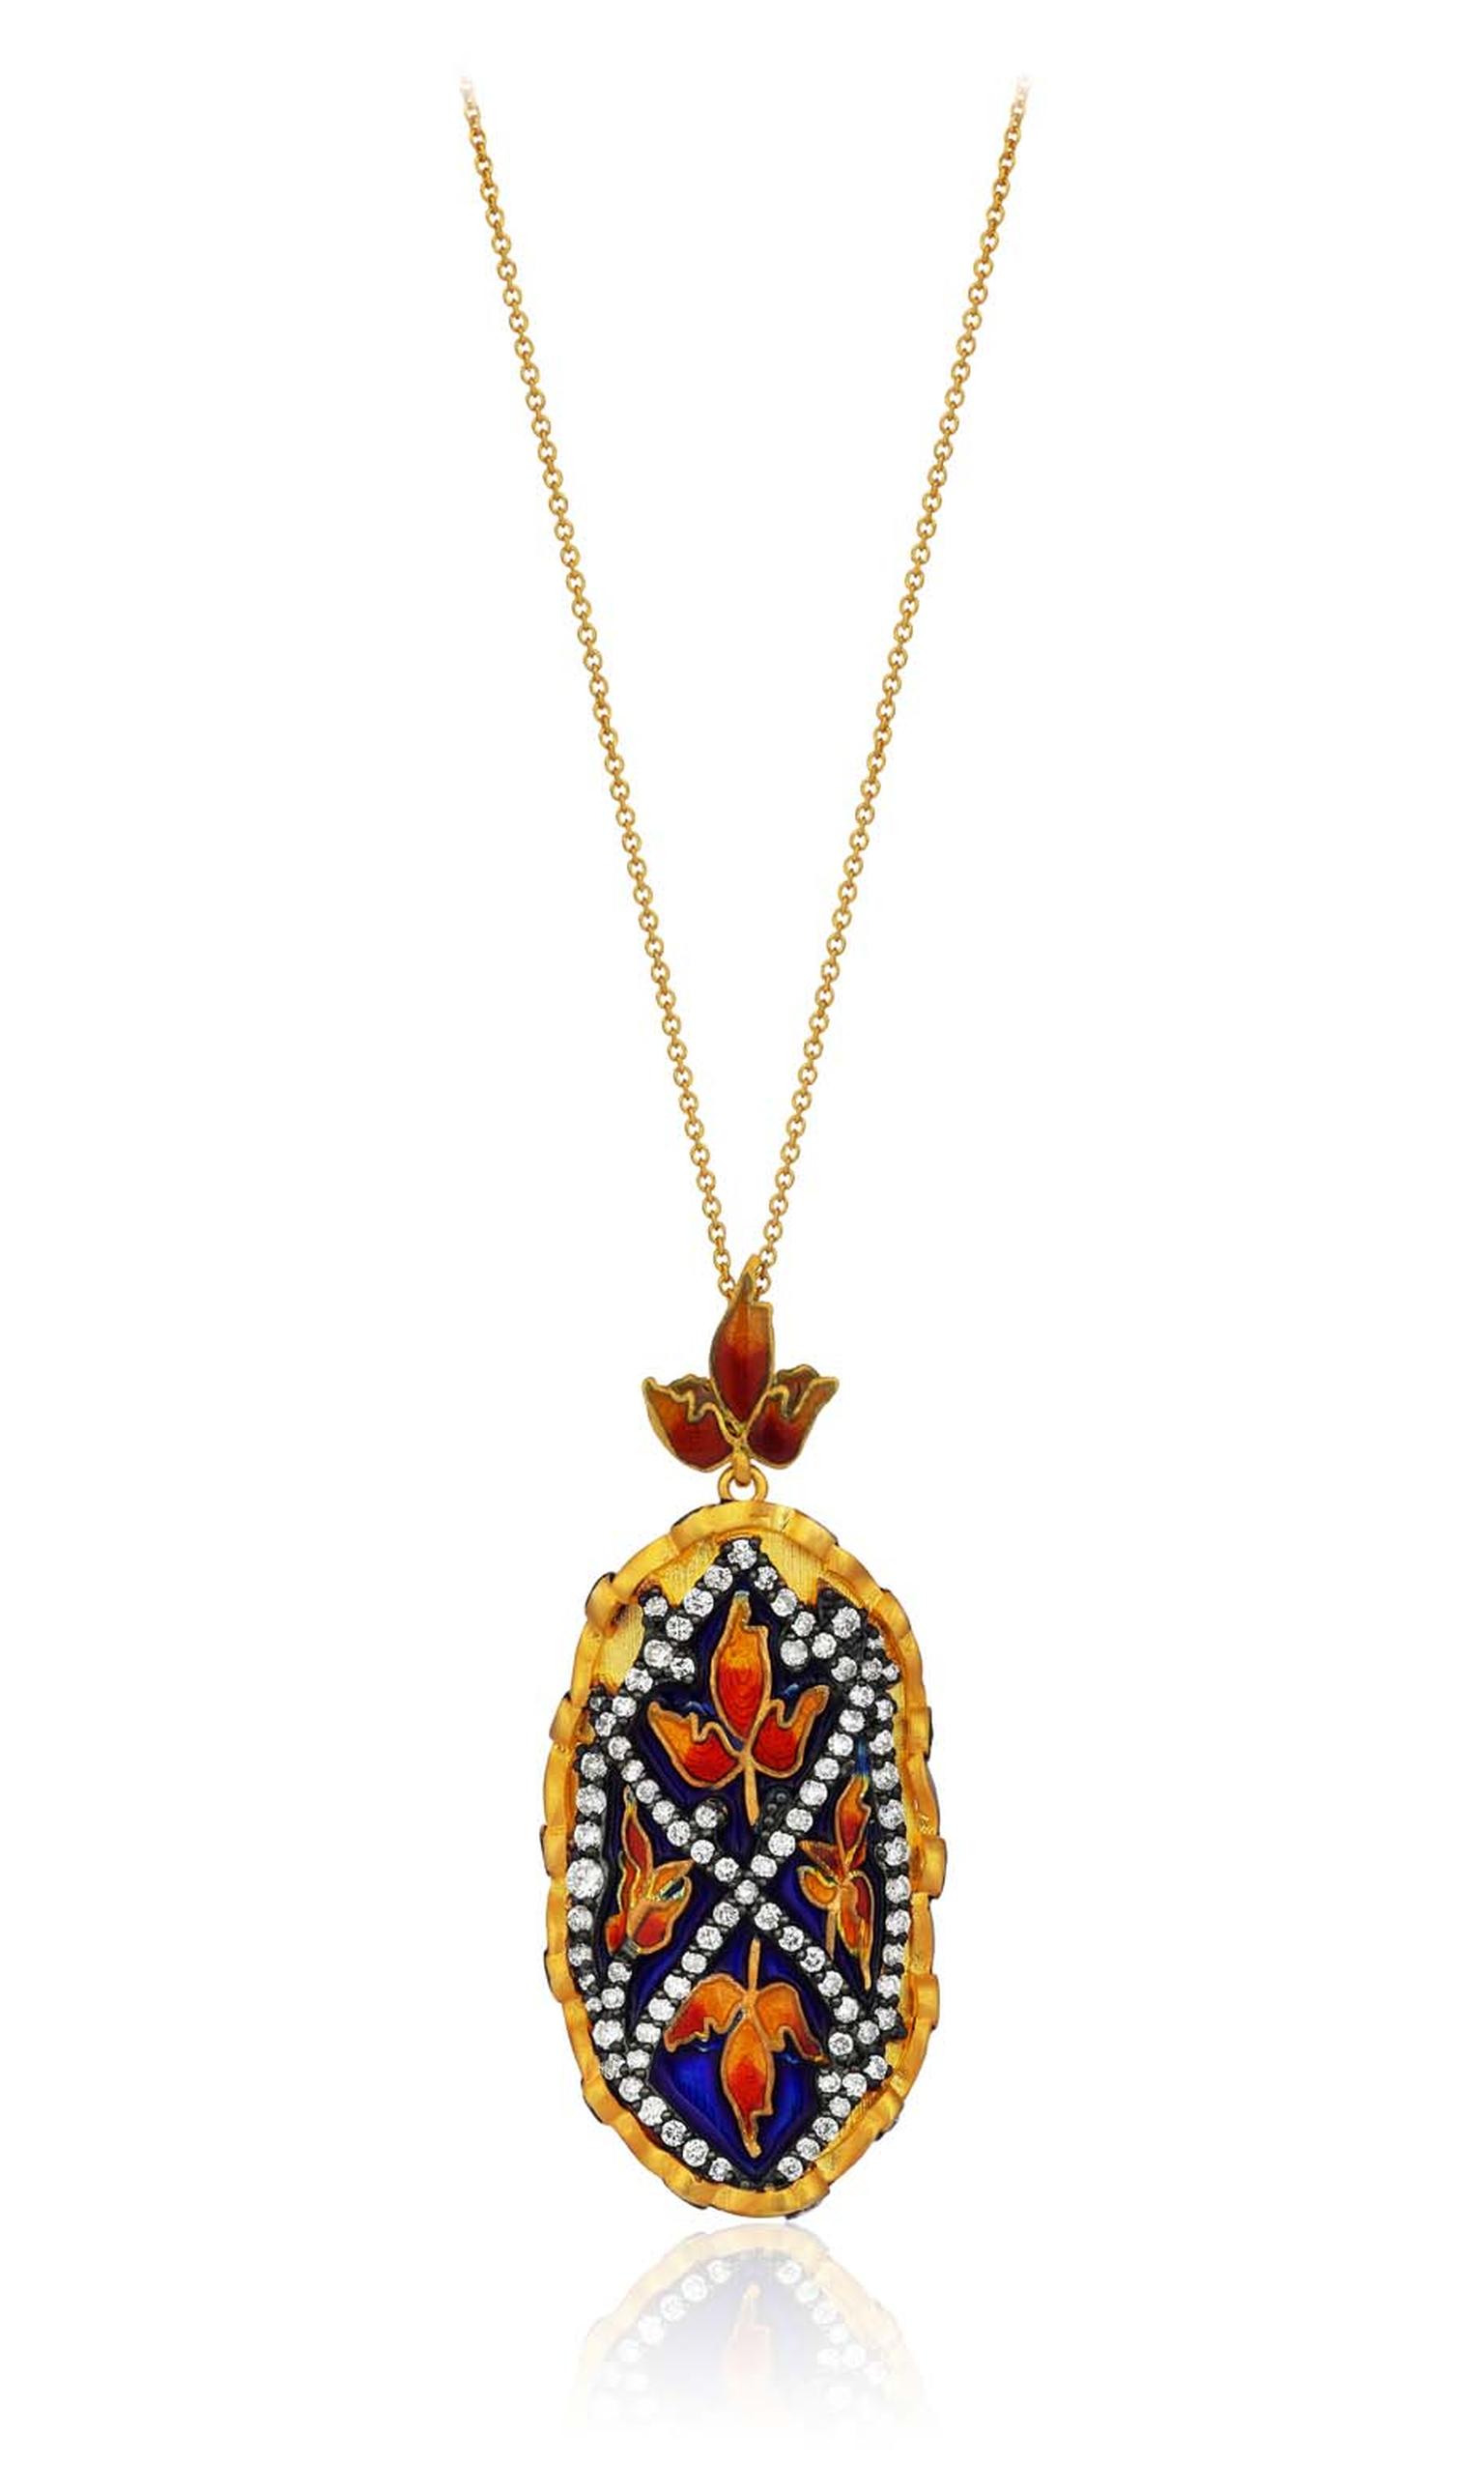 Pinar Oner Gezi necklace with diamonds and floral enameling.